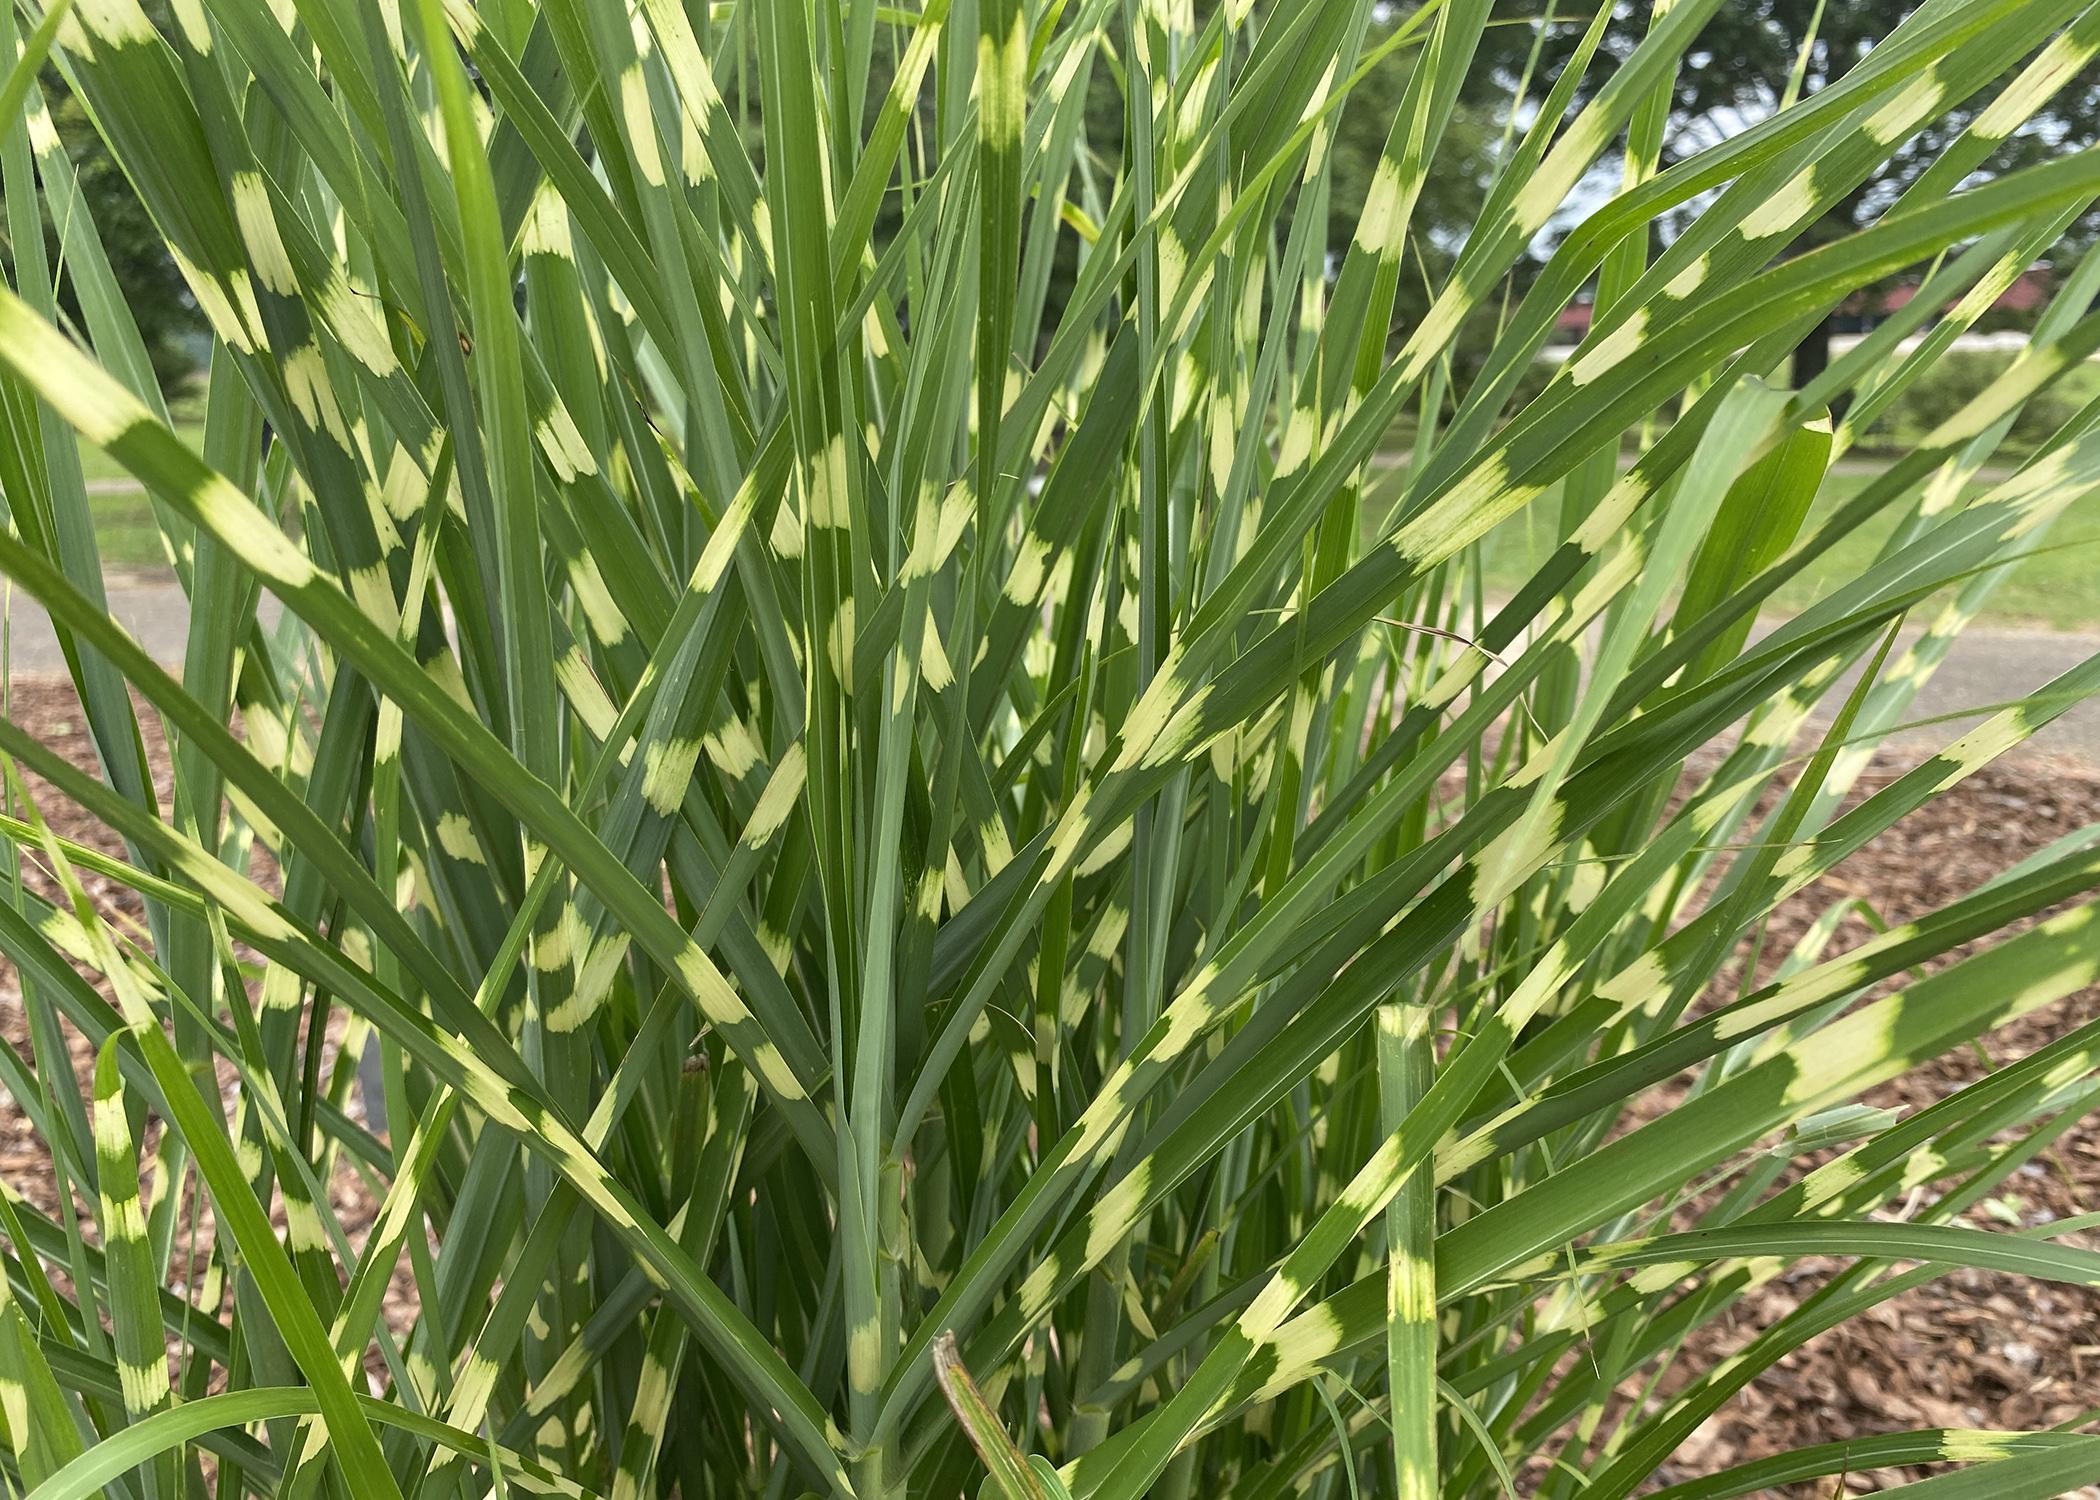 Grass blades are green with random yellowish patches.